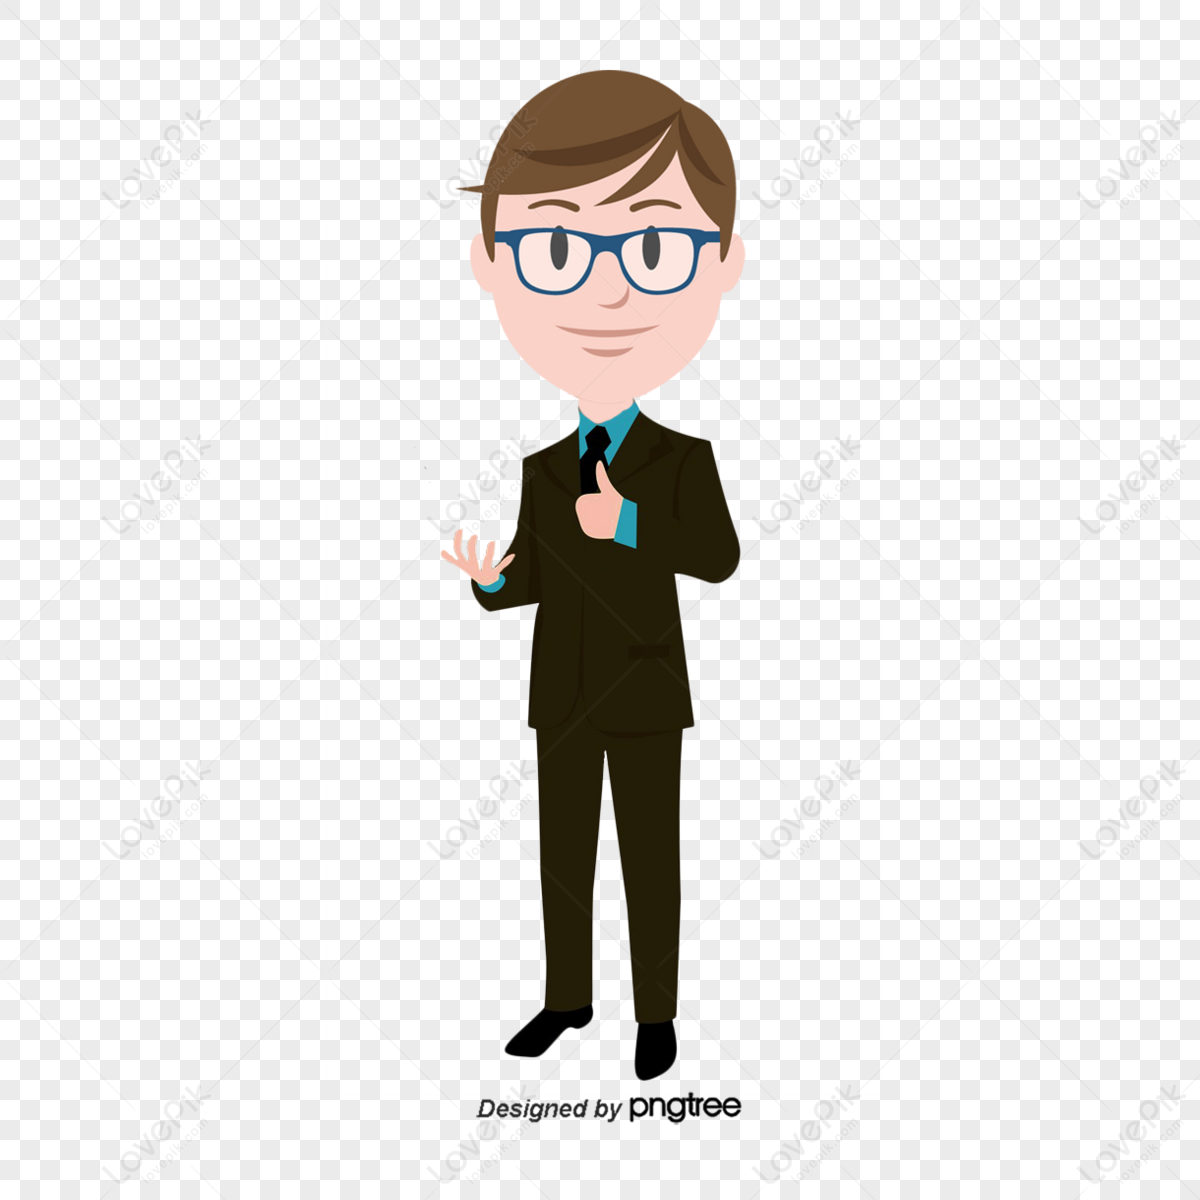 Man Wearing Glasses PNG Images With Transparent Background | Free ...